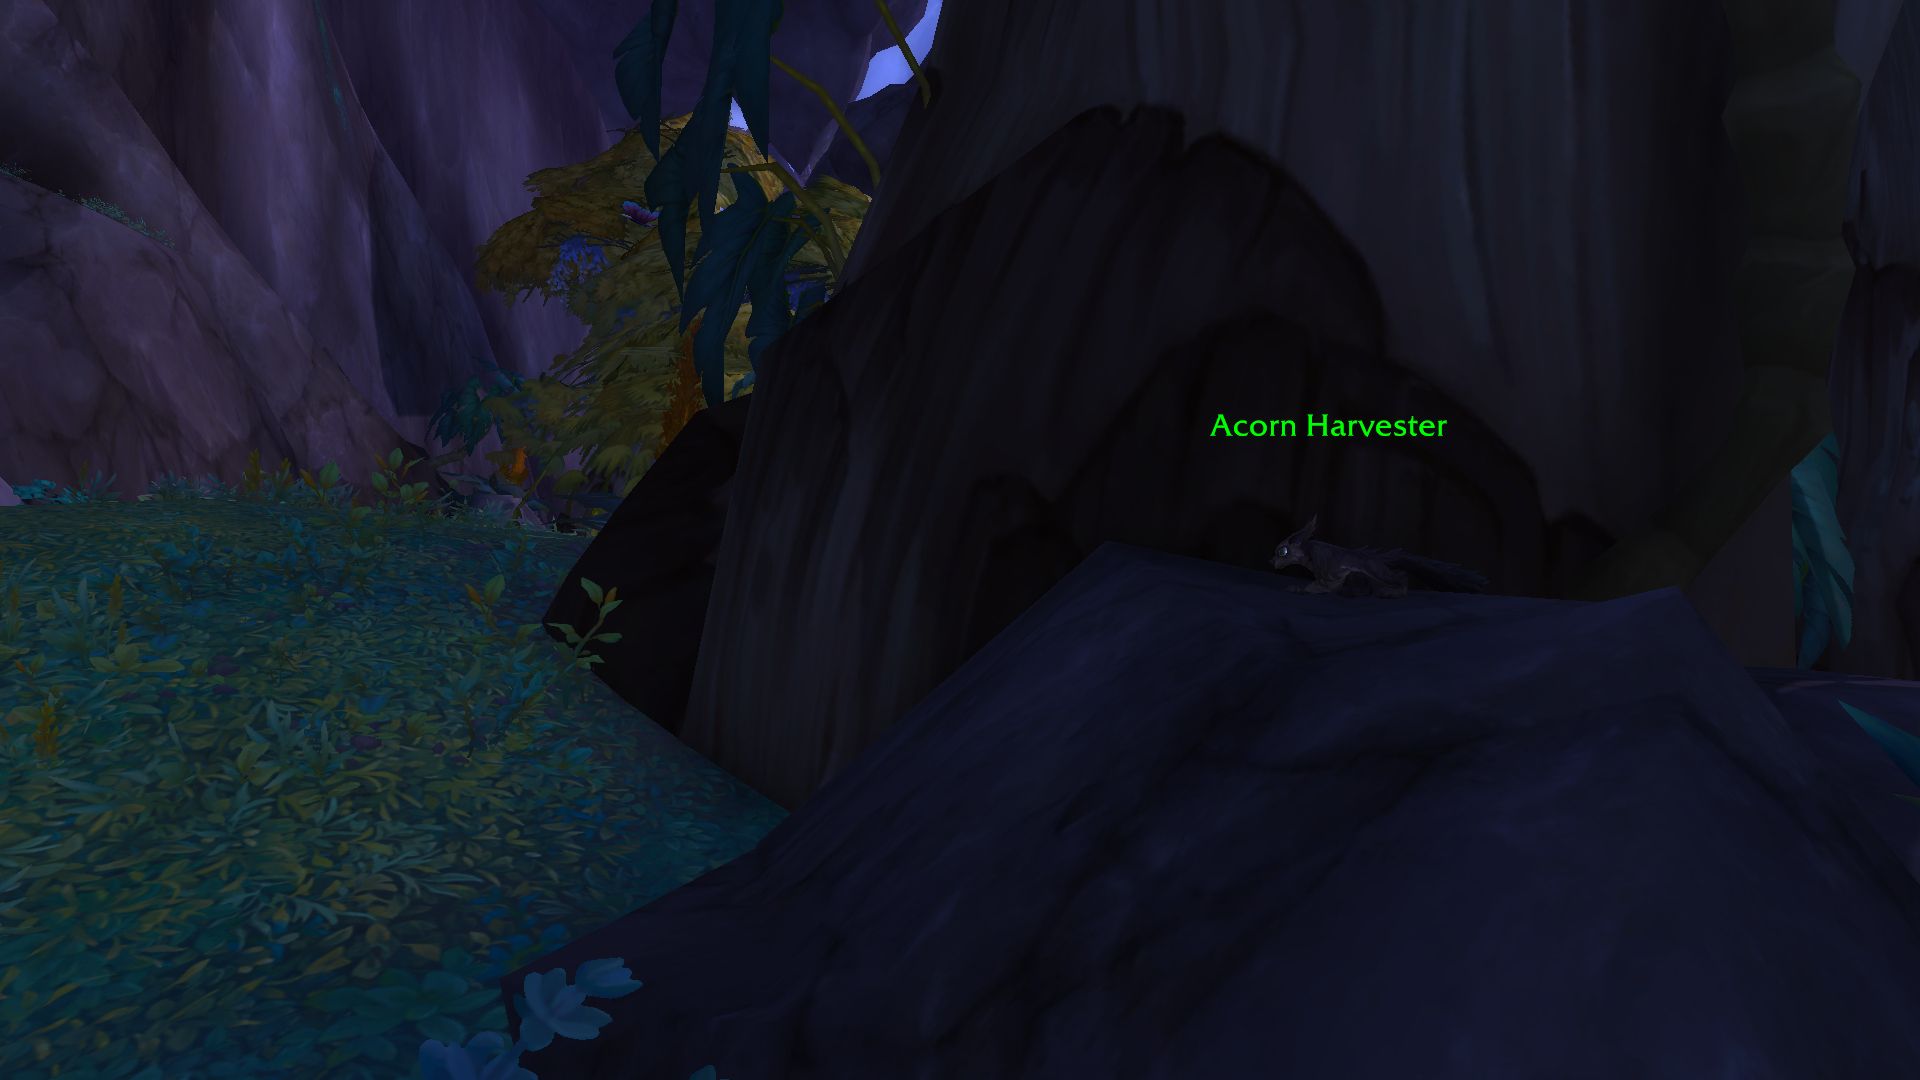 The in-game location of the Acorn Harvester, camouflaged beside a tree.